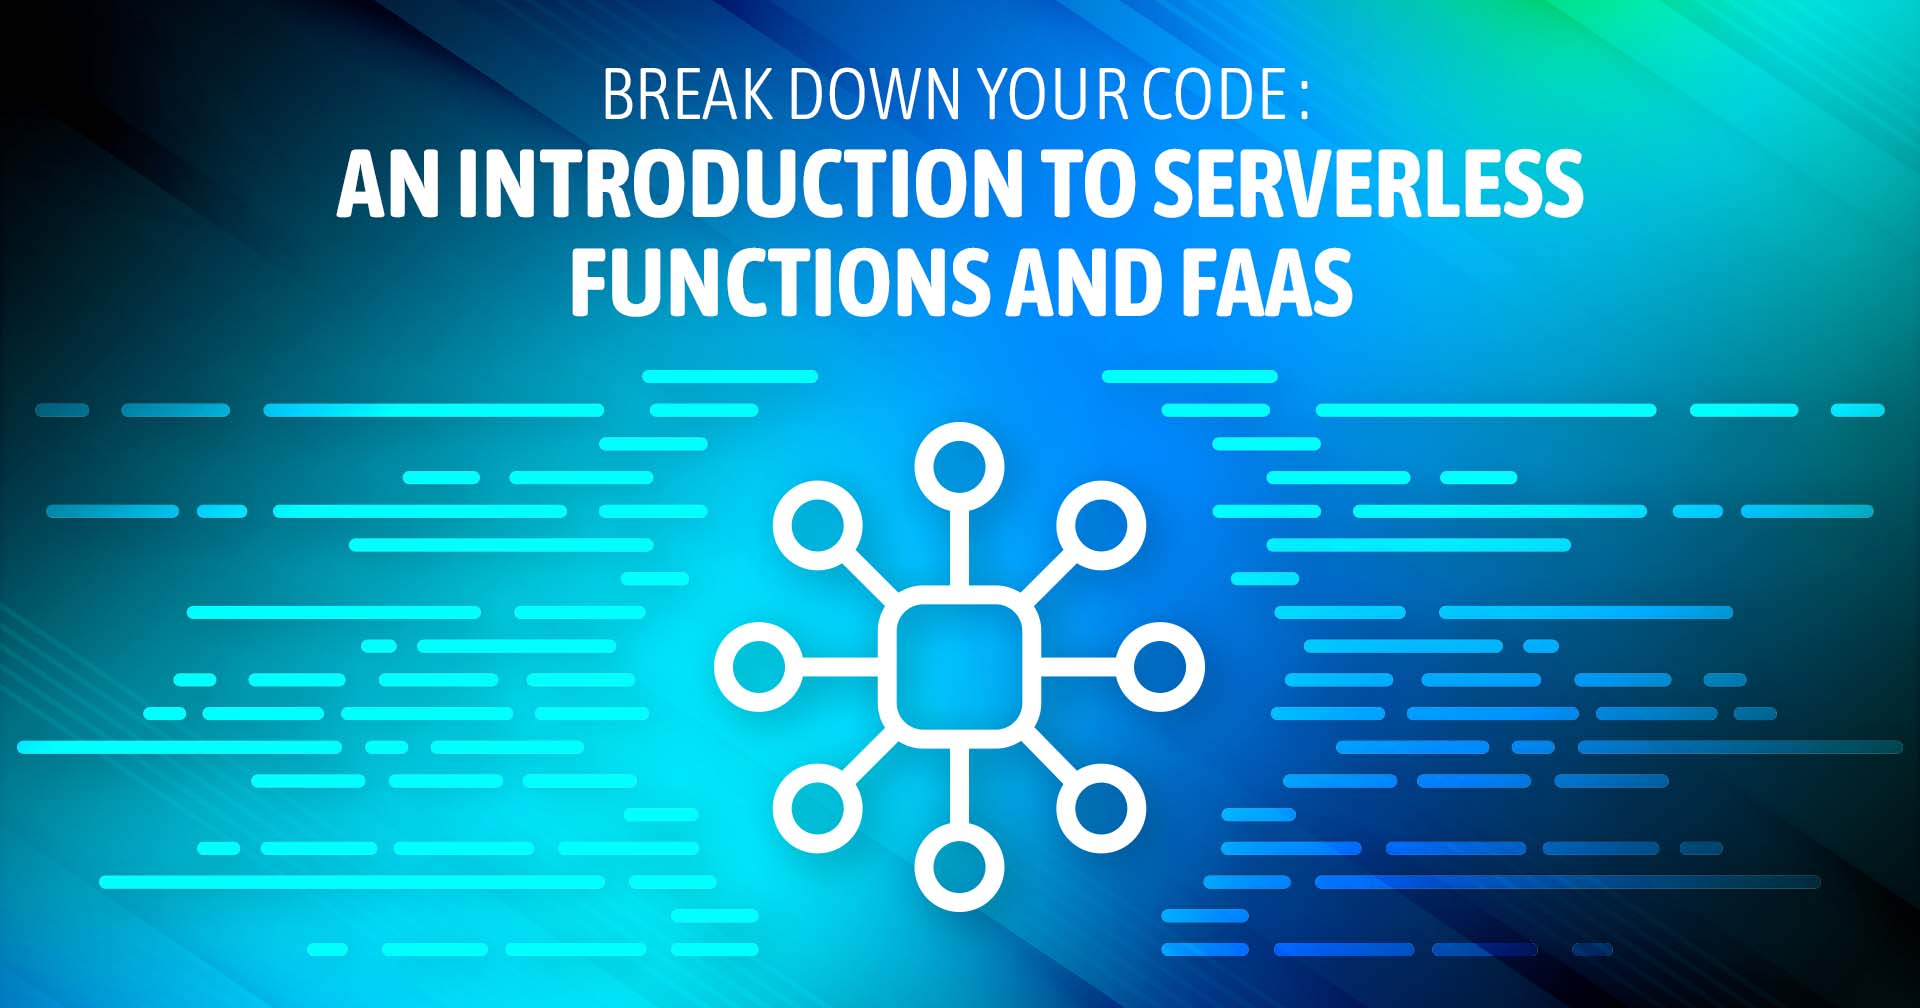 An Introduction to Serverless Functions and FaaS